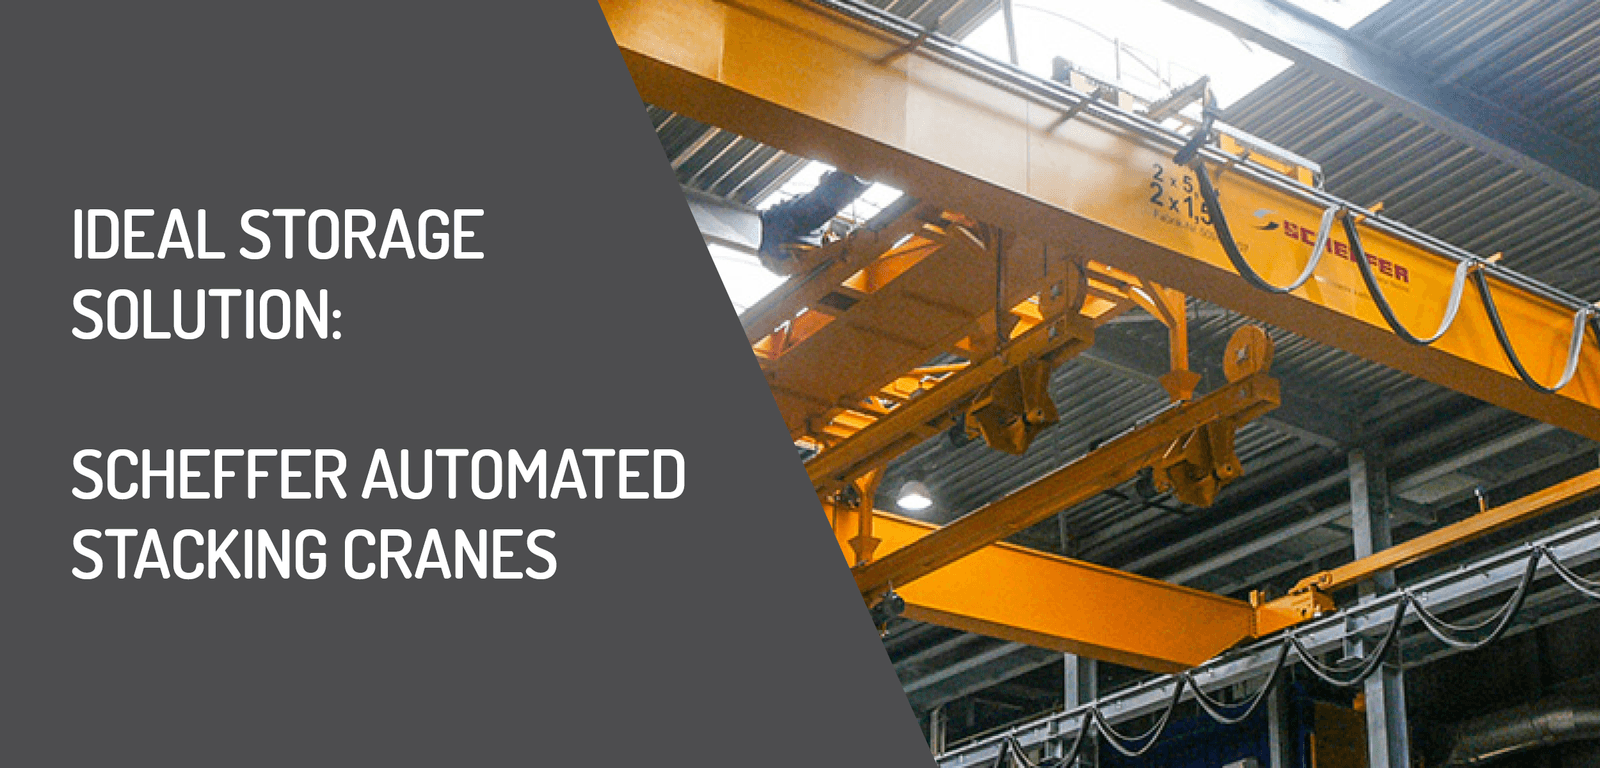 Ideal Storage Solution: Automated Stacking Cranes